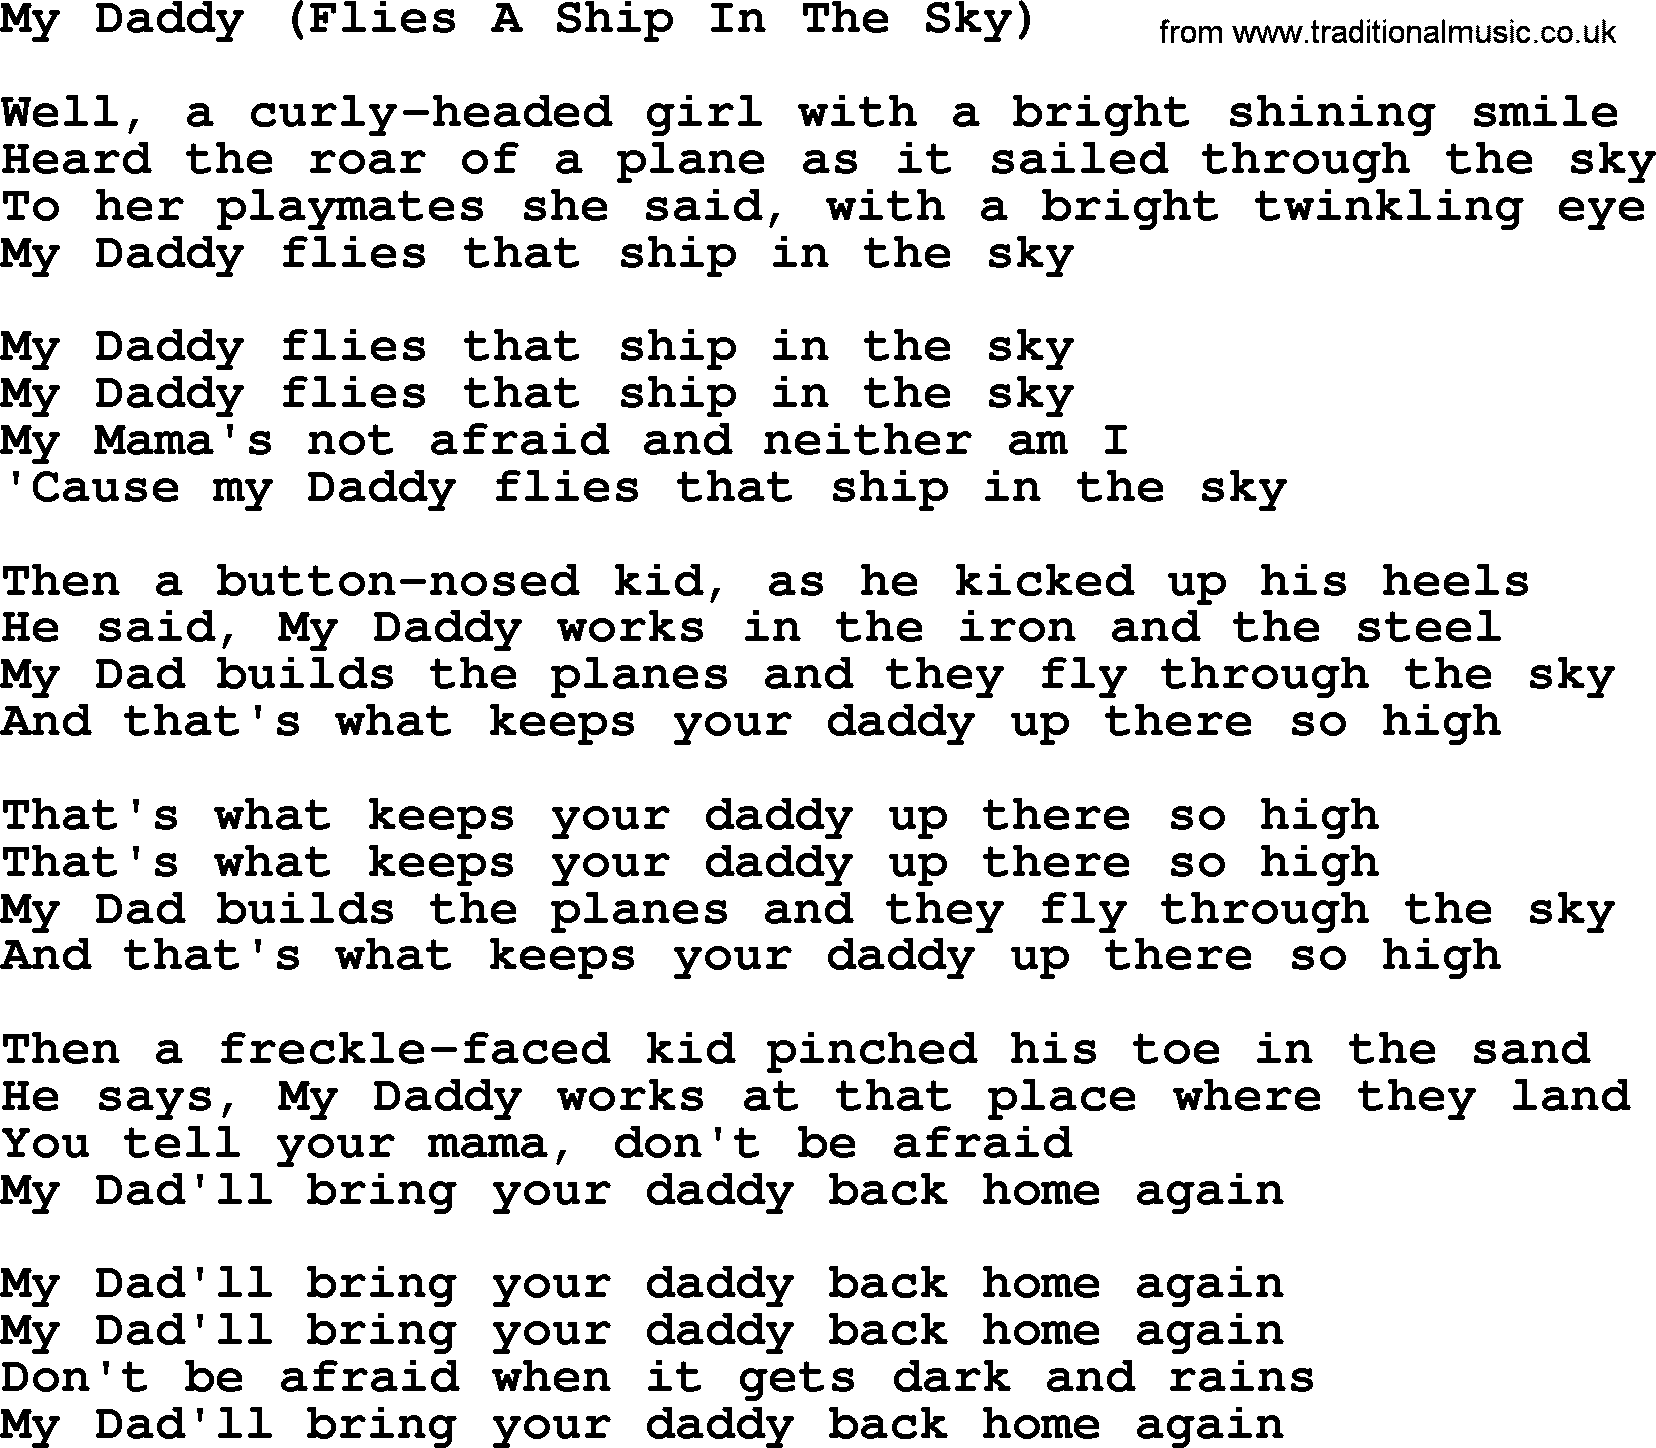 Woody Guthrie song My Daddy Flies A Ship In The Sky lyrics